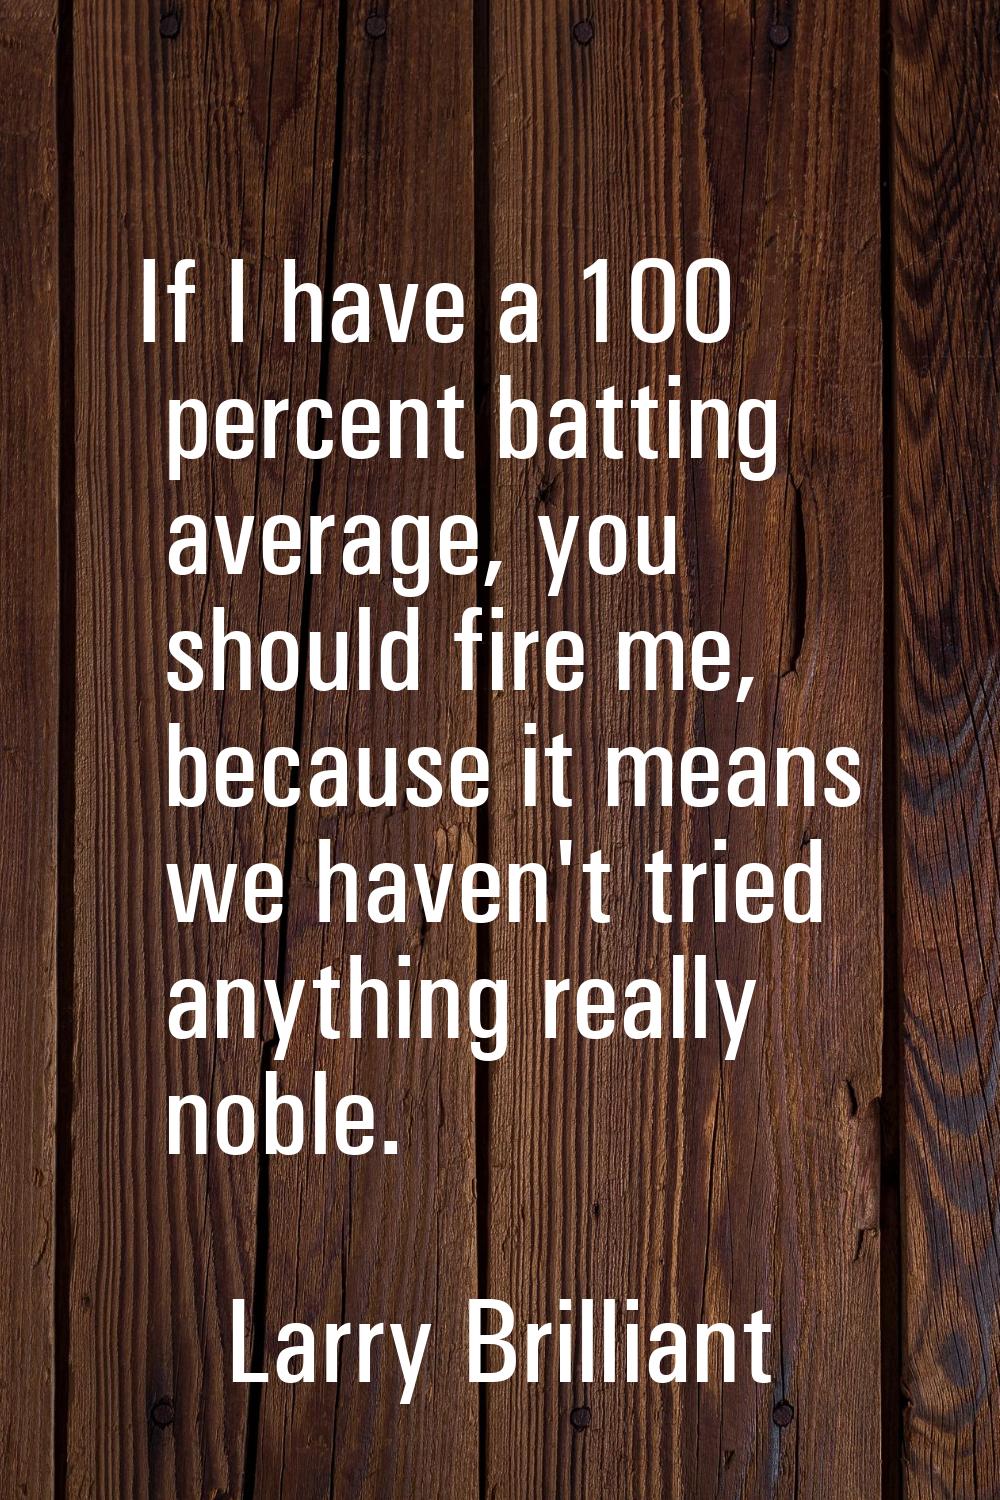 If I have a 100 percent batting average, you should fire me, because it means we haven't tried anyt